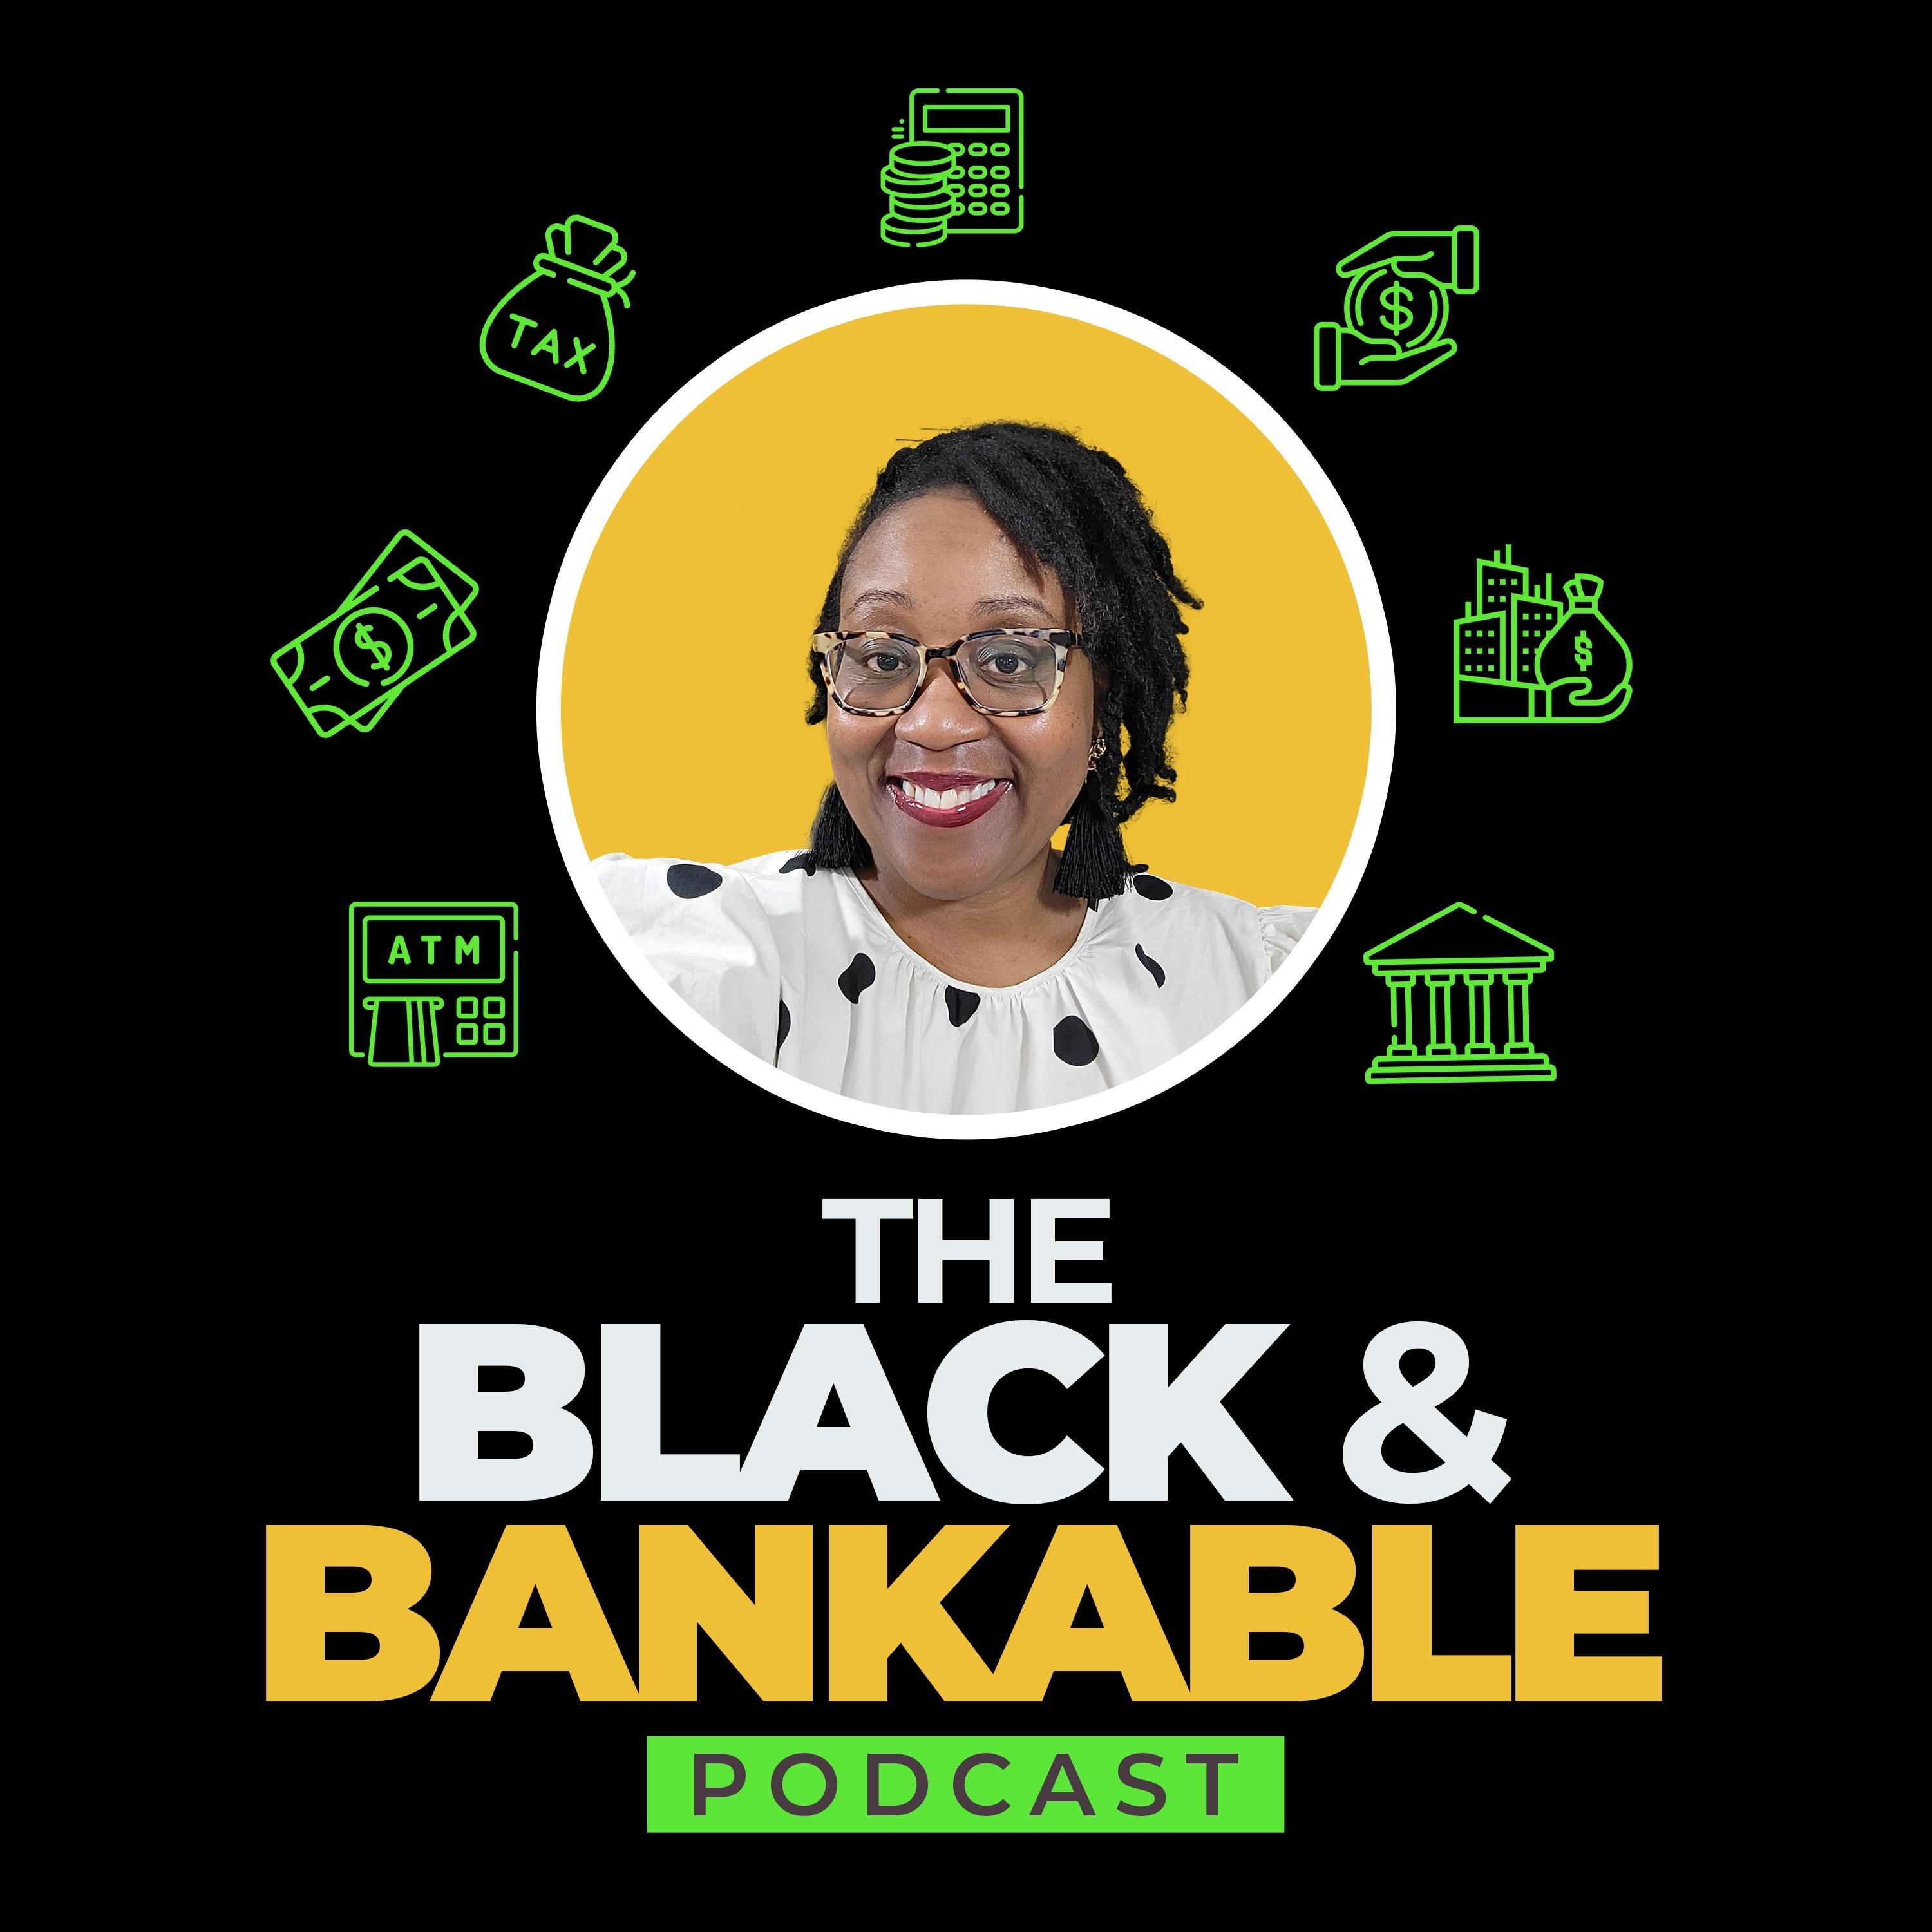 Black & Bankable CEO Podcast